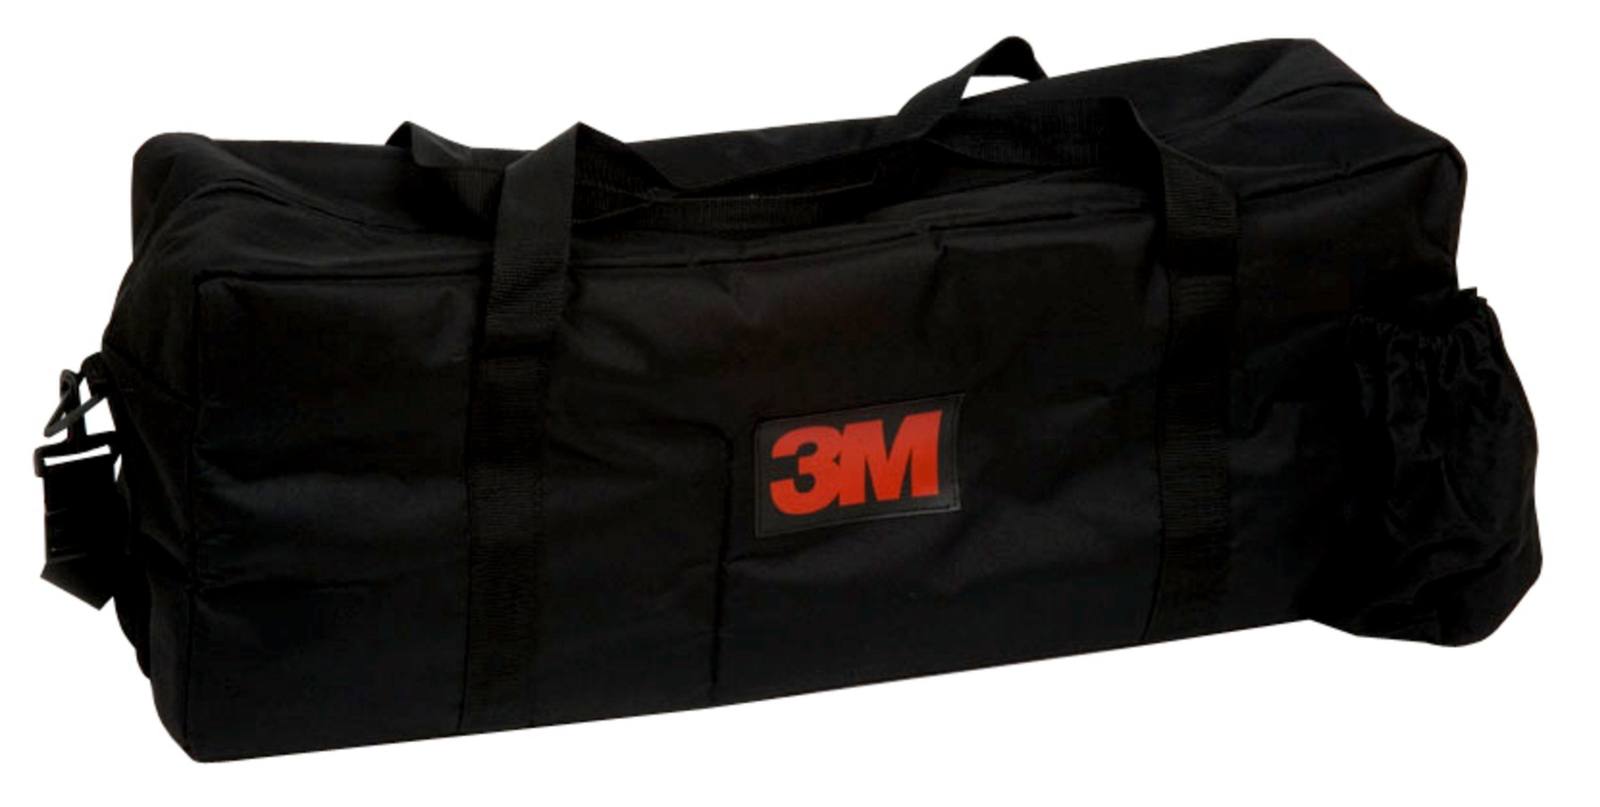 3M Dynatel carrying case for Dynatel locators 2200M, 2500 and 7000